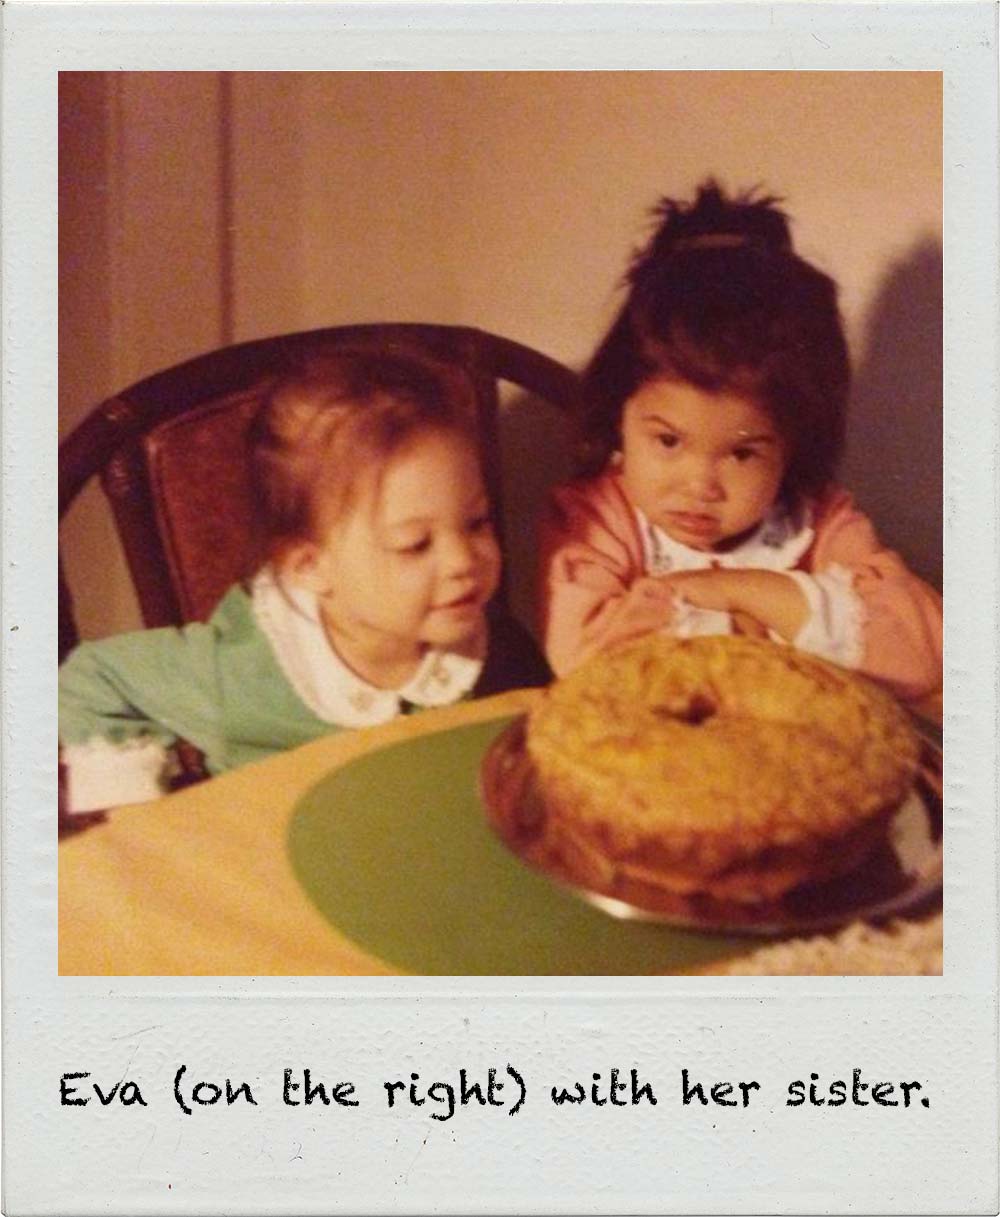 Eva (on the right) with her sister.